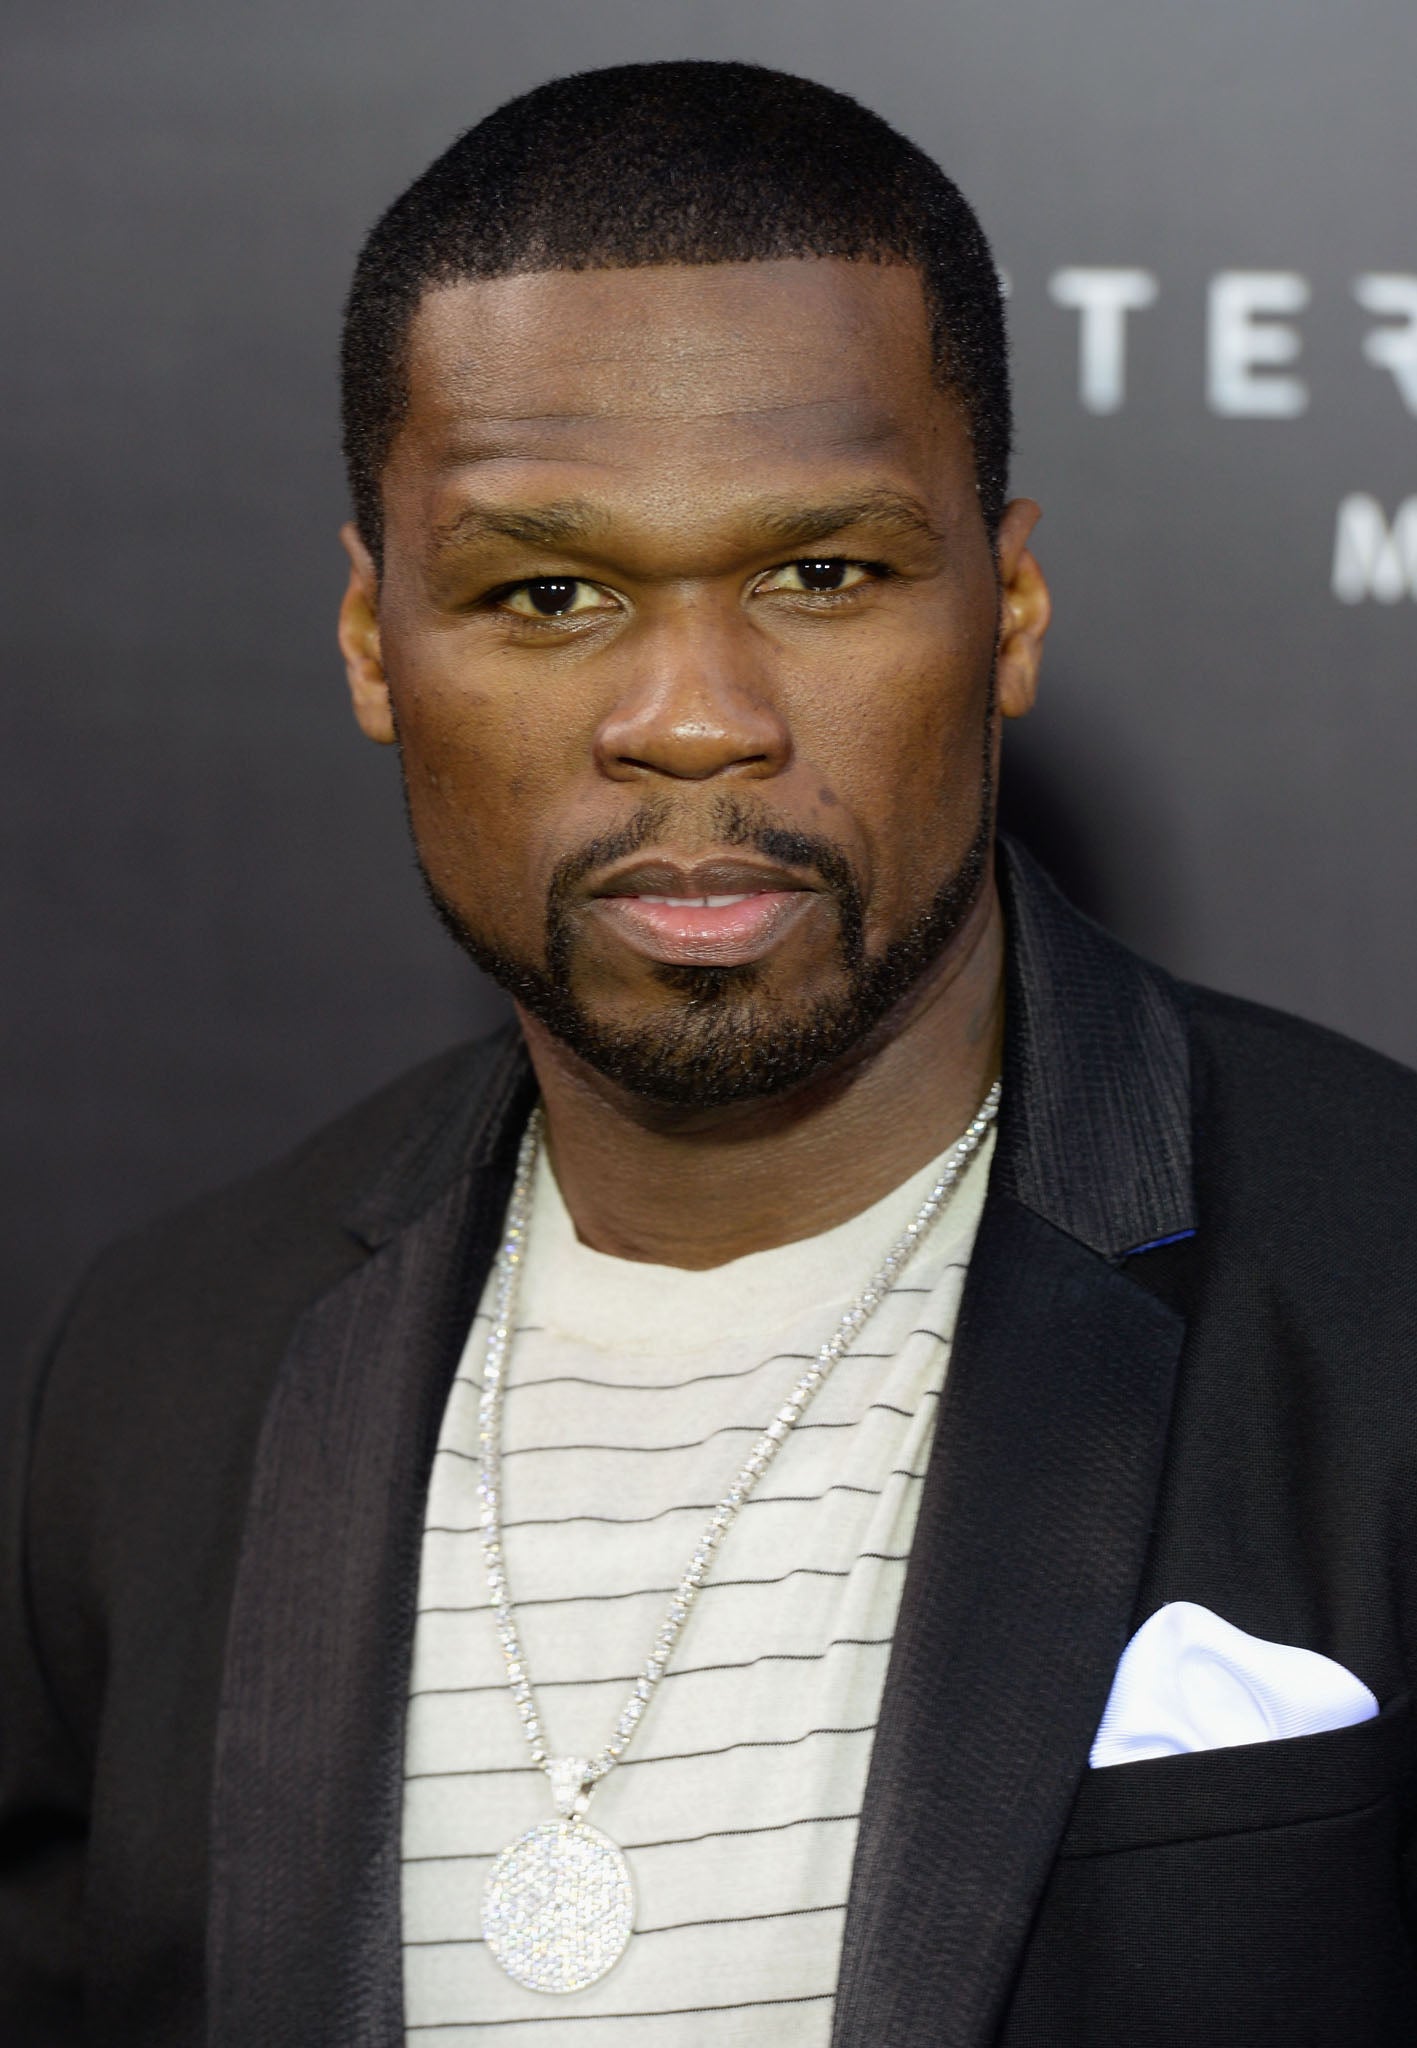 50 Cent aka Curtis Jackson has been arrested for allegedly attacking his ex-girlfriend and vandalising her home